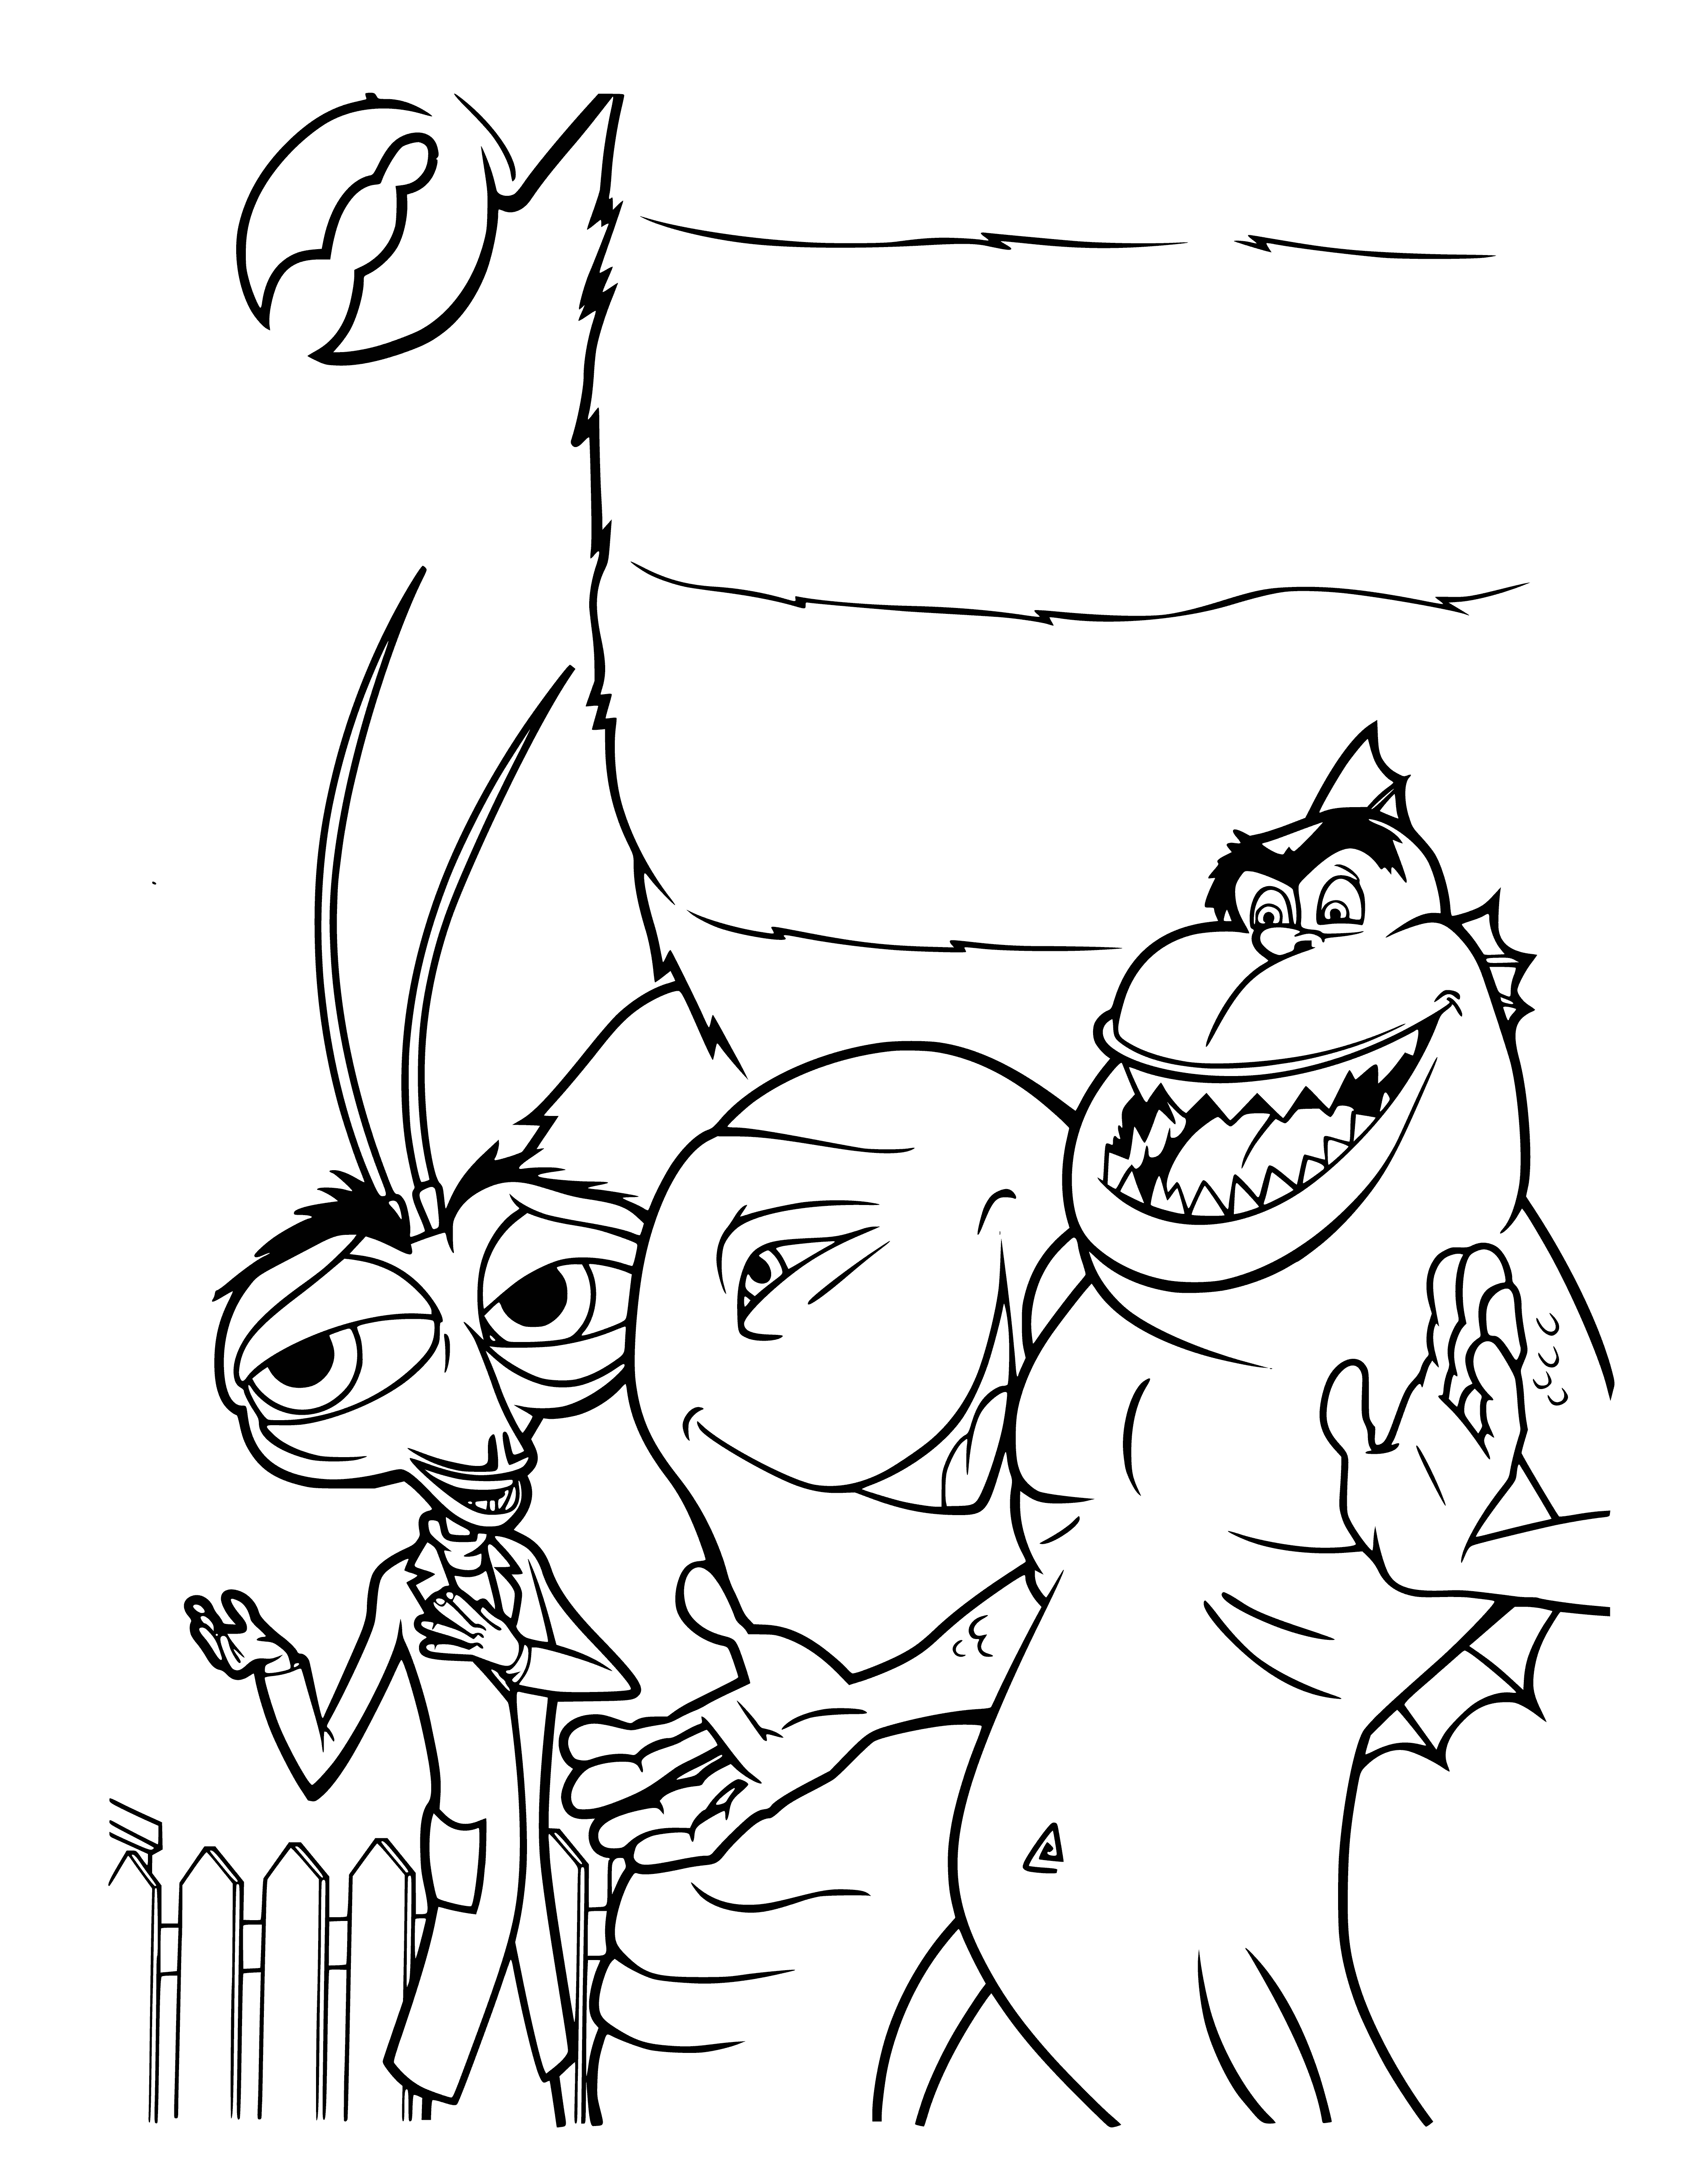 coloring page: Monsters & aliens stand around a smiling human woman in a friendly gathering.